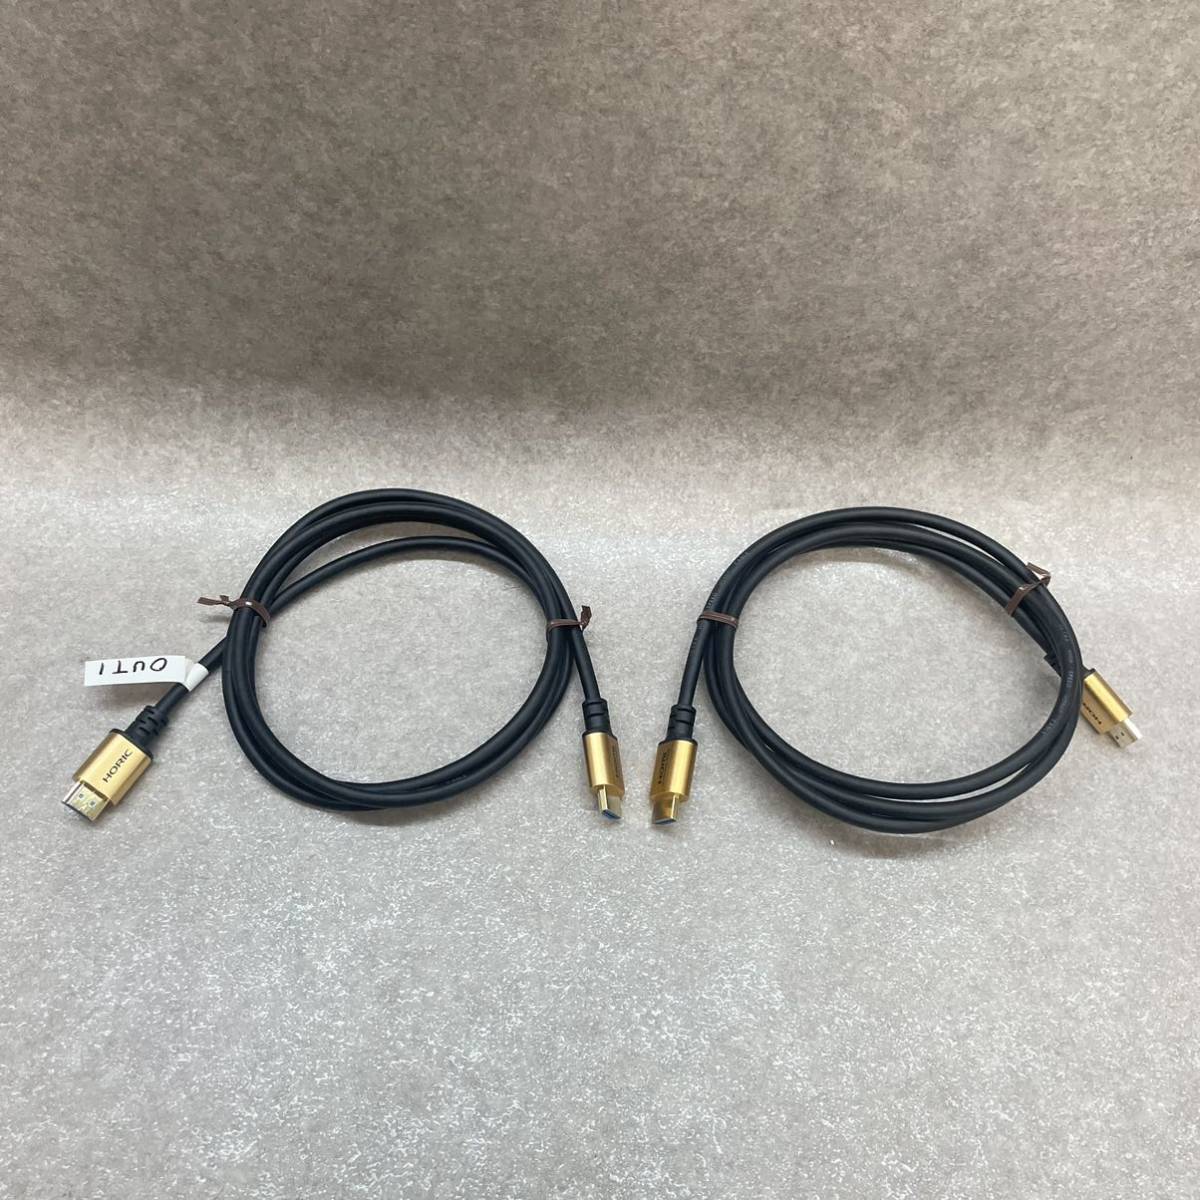 E1208) Ultra high speed HDMI cable 1.5m 2 ps pair HDM15-648GD